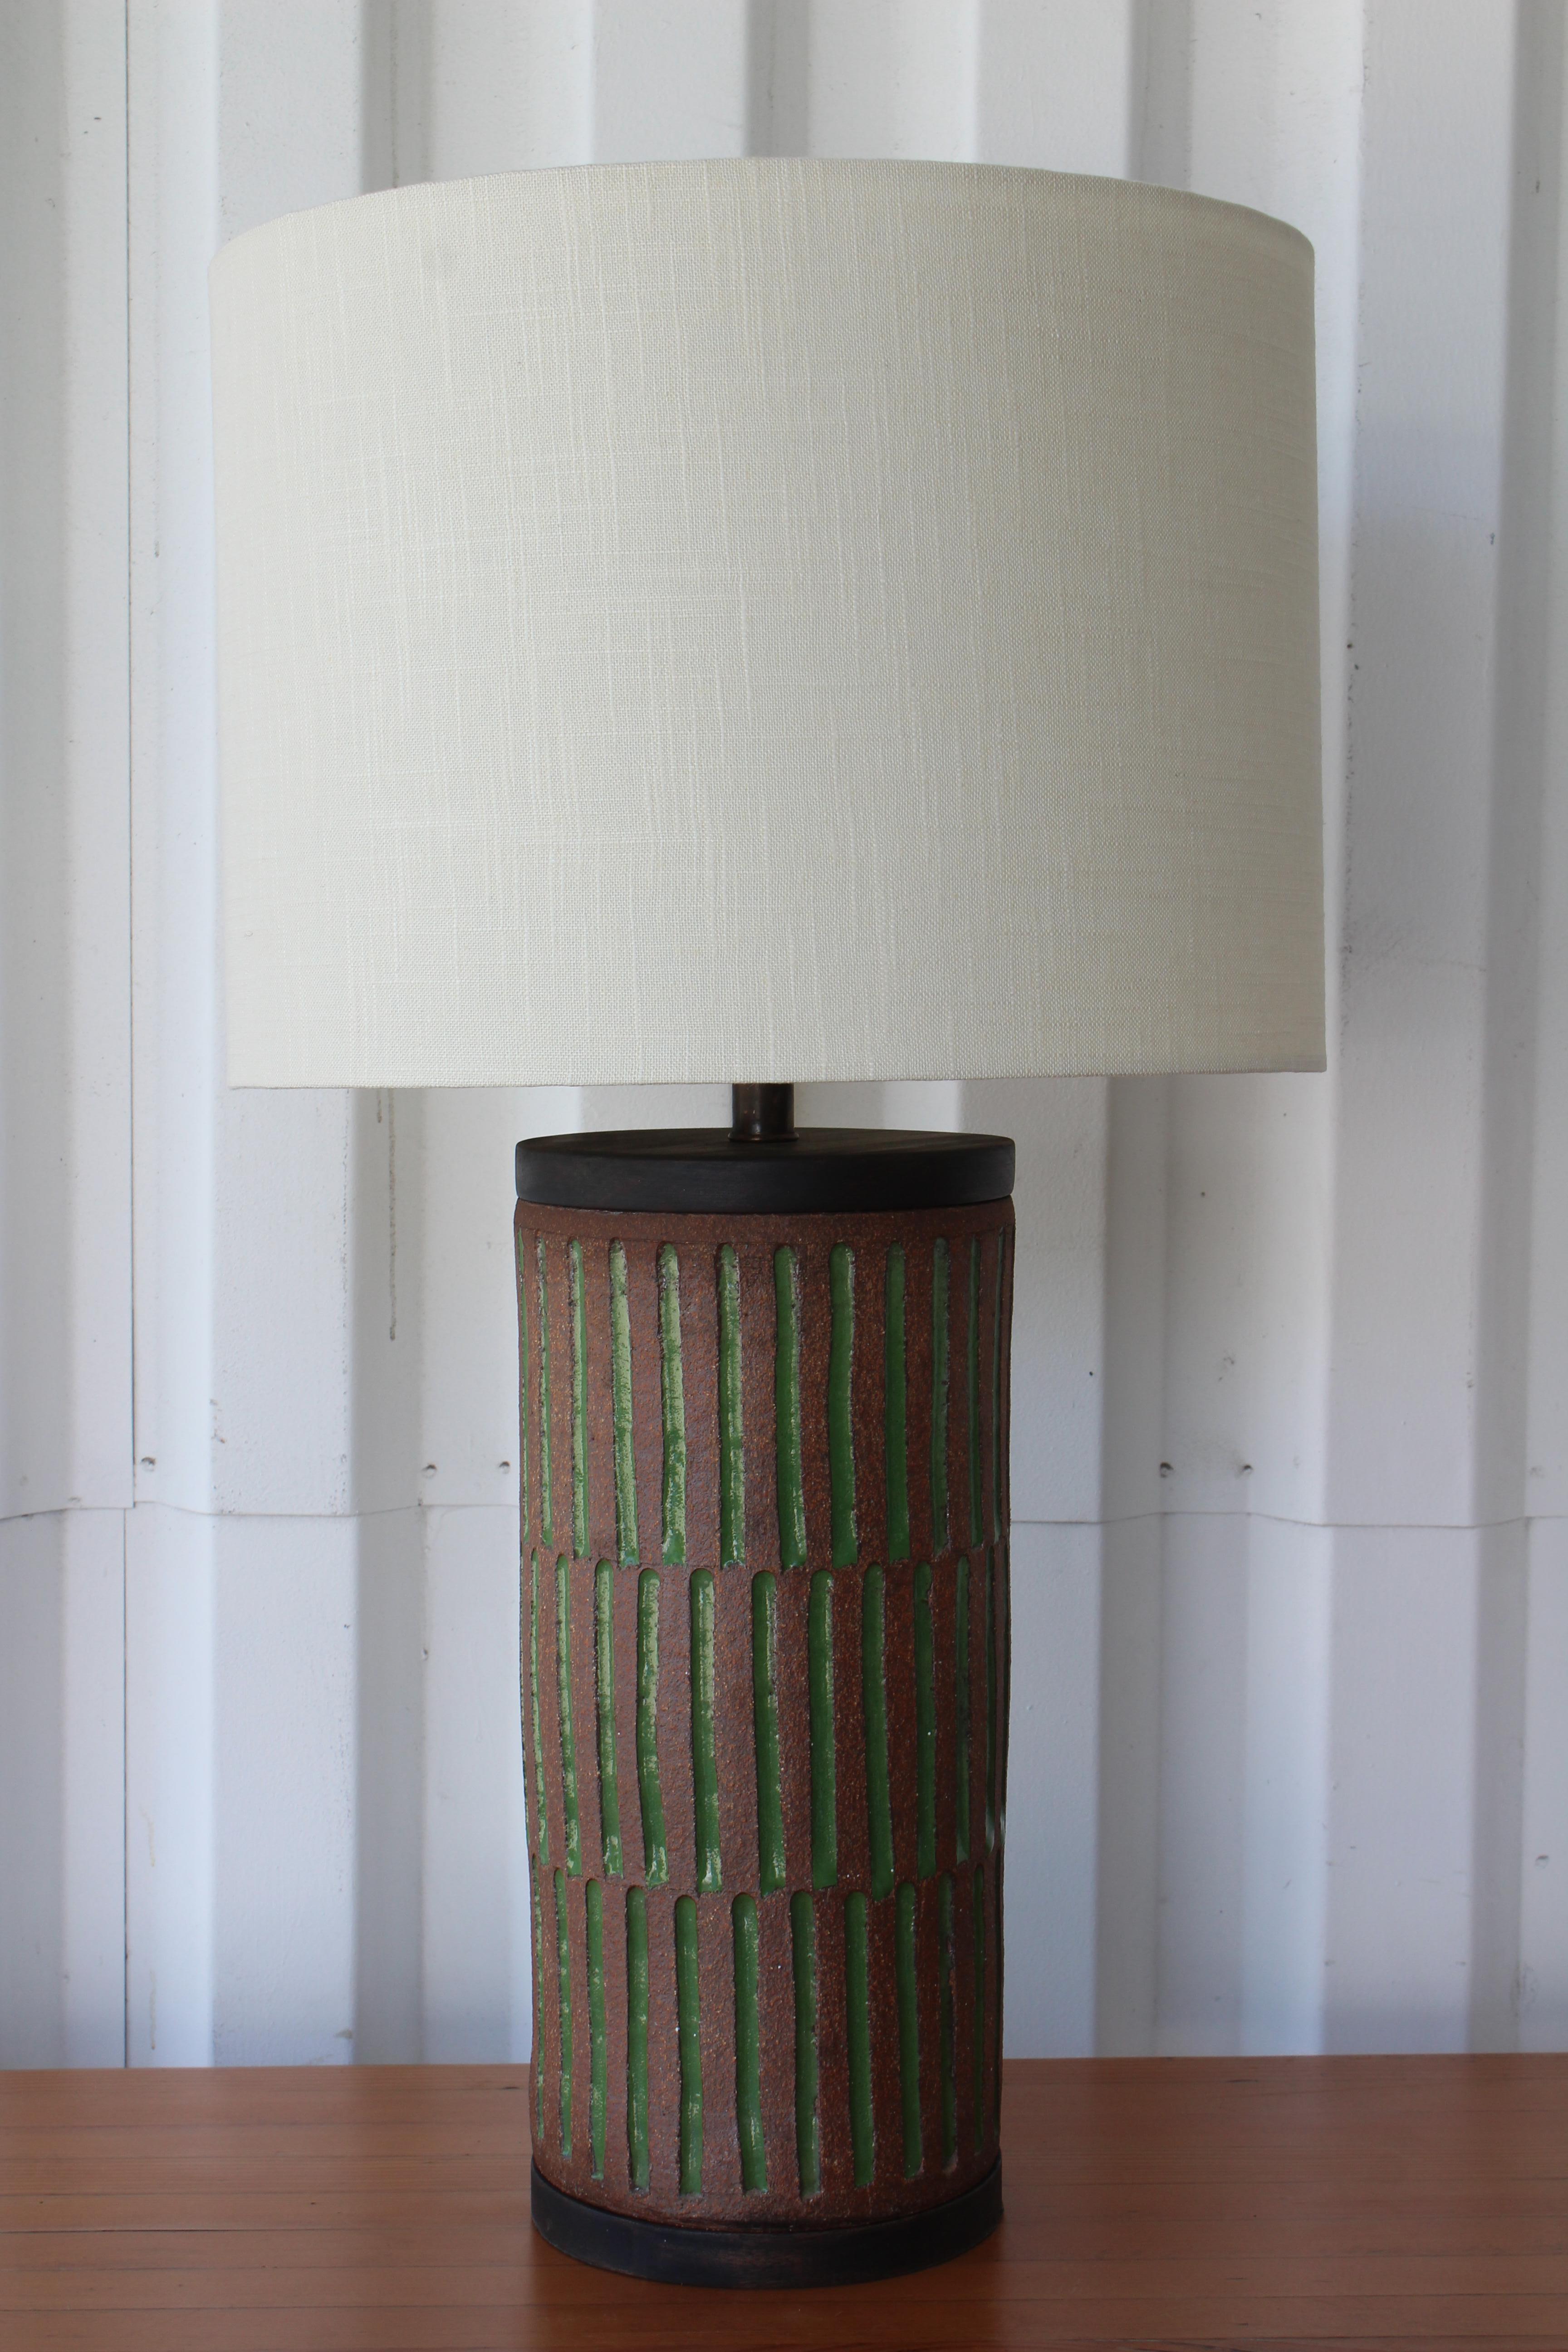 Vintage stoneware pottery lamp by Brent Bennett, California, 1960s. Newly rewired with custom shade in Belgian linen.
Measures: 27